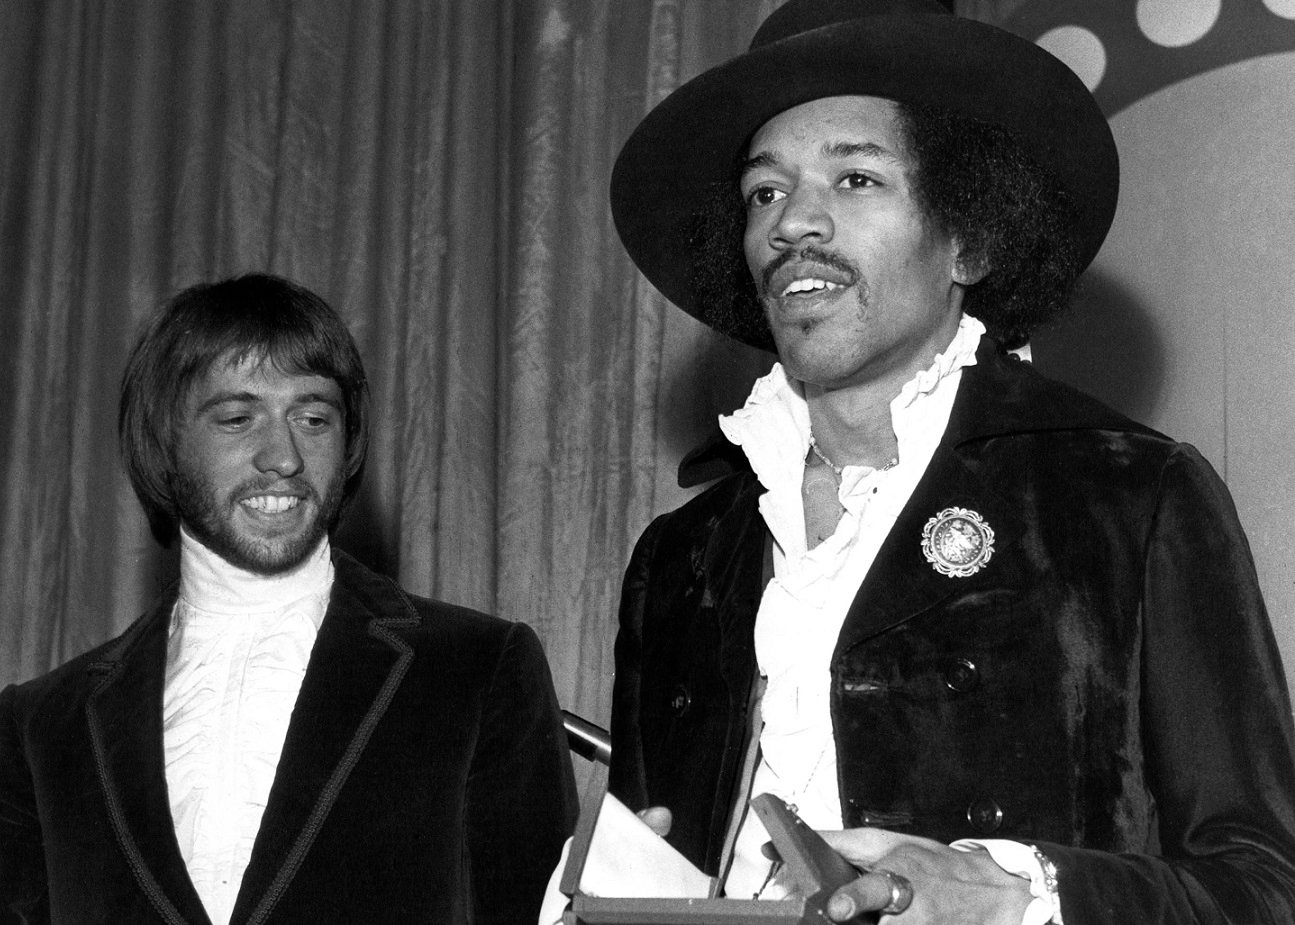 Jimi Hendrix smiles and holds an award